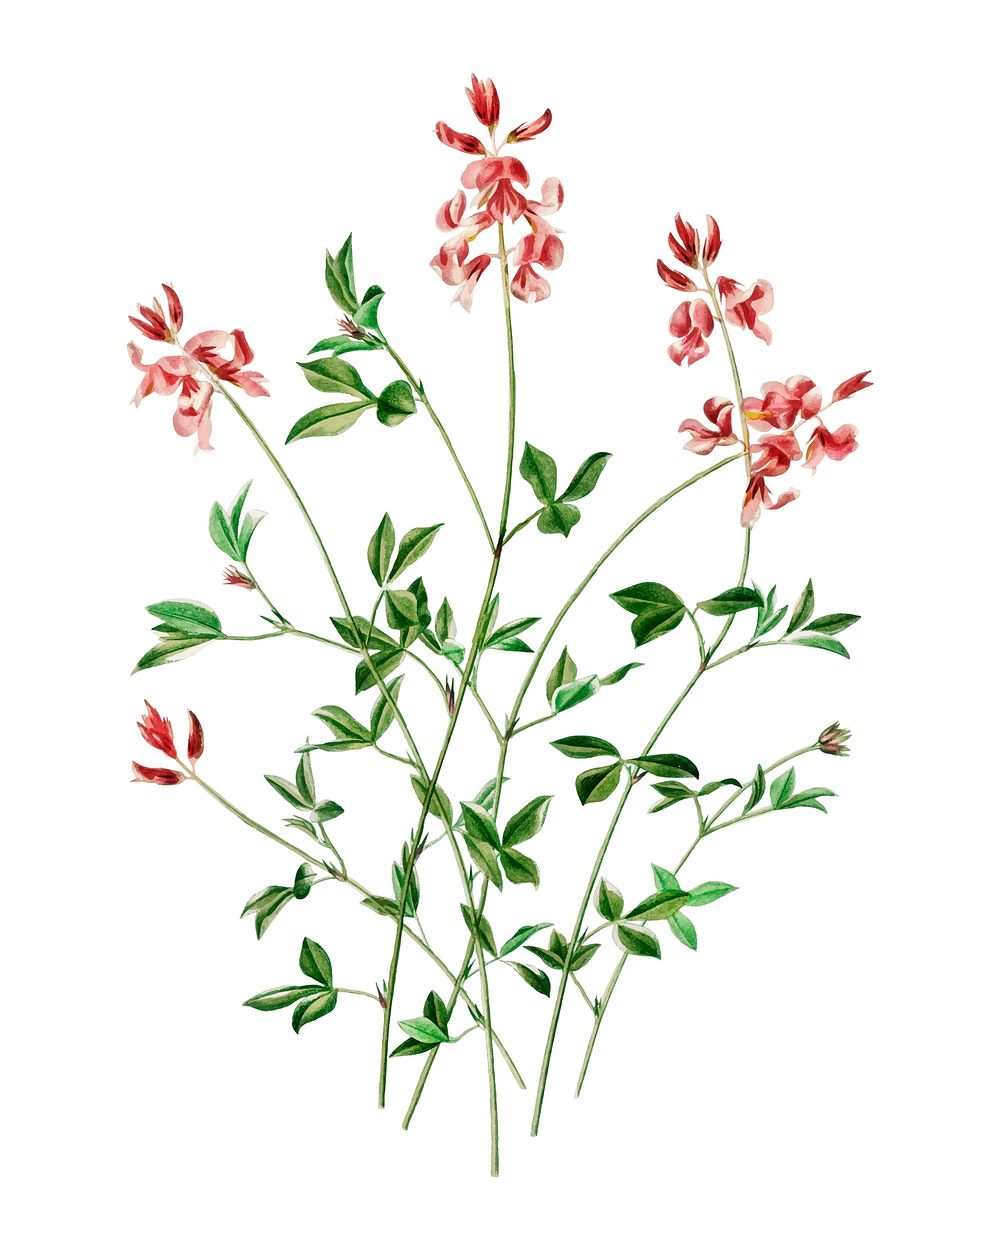 Indigofera procumbens illustrated by Charles Dessalines D' Orbigny (1806-1876). Digitally enhanced from our own 1892 edition…